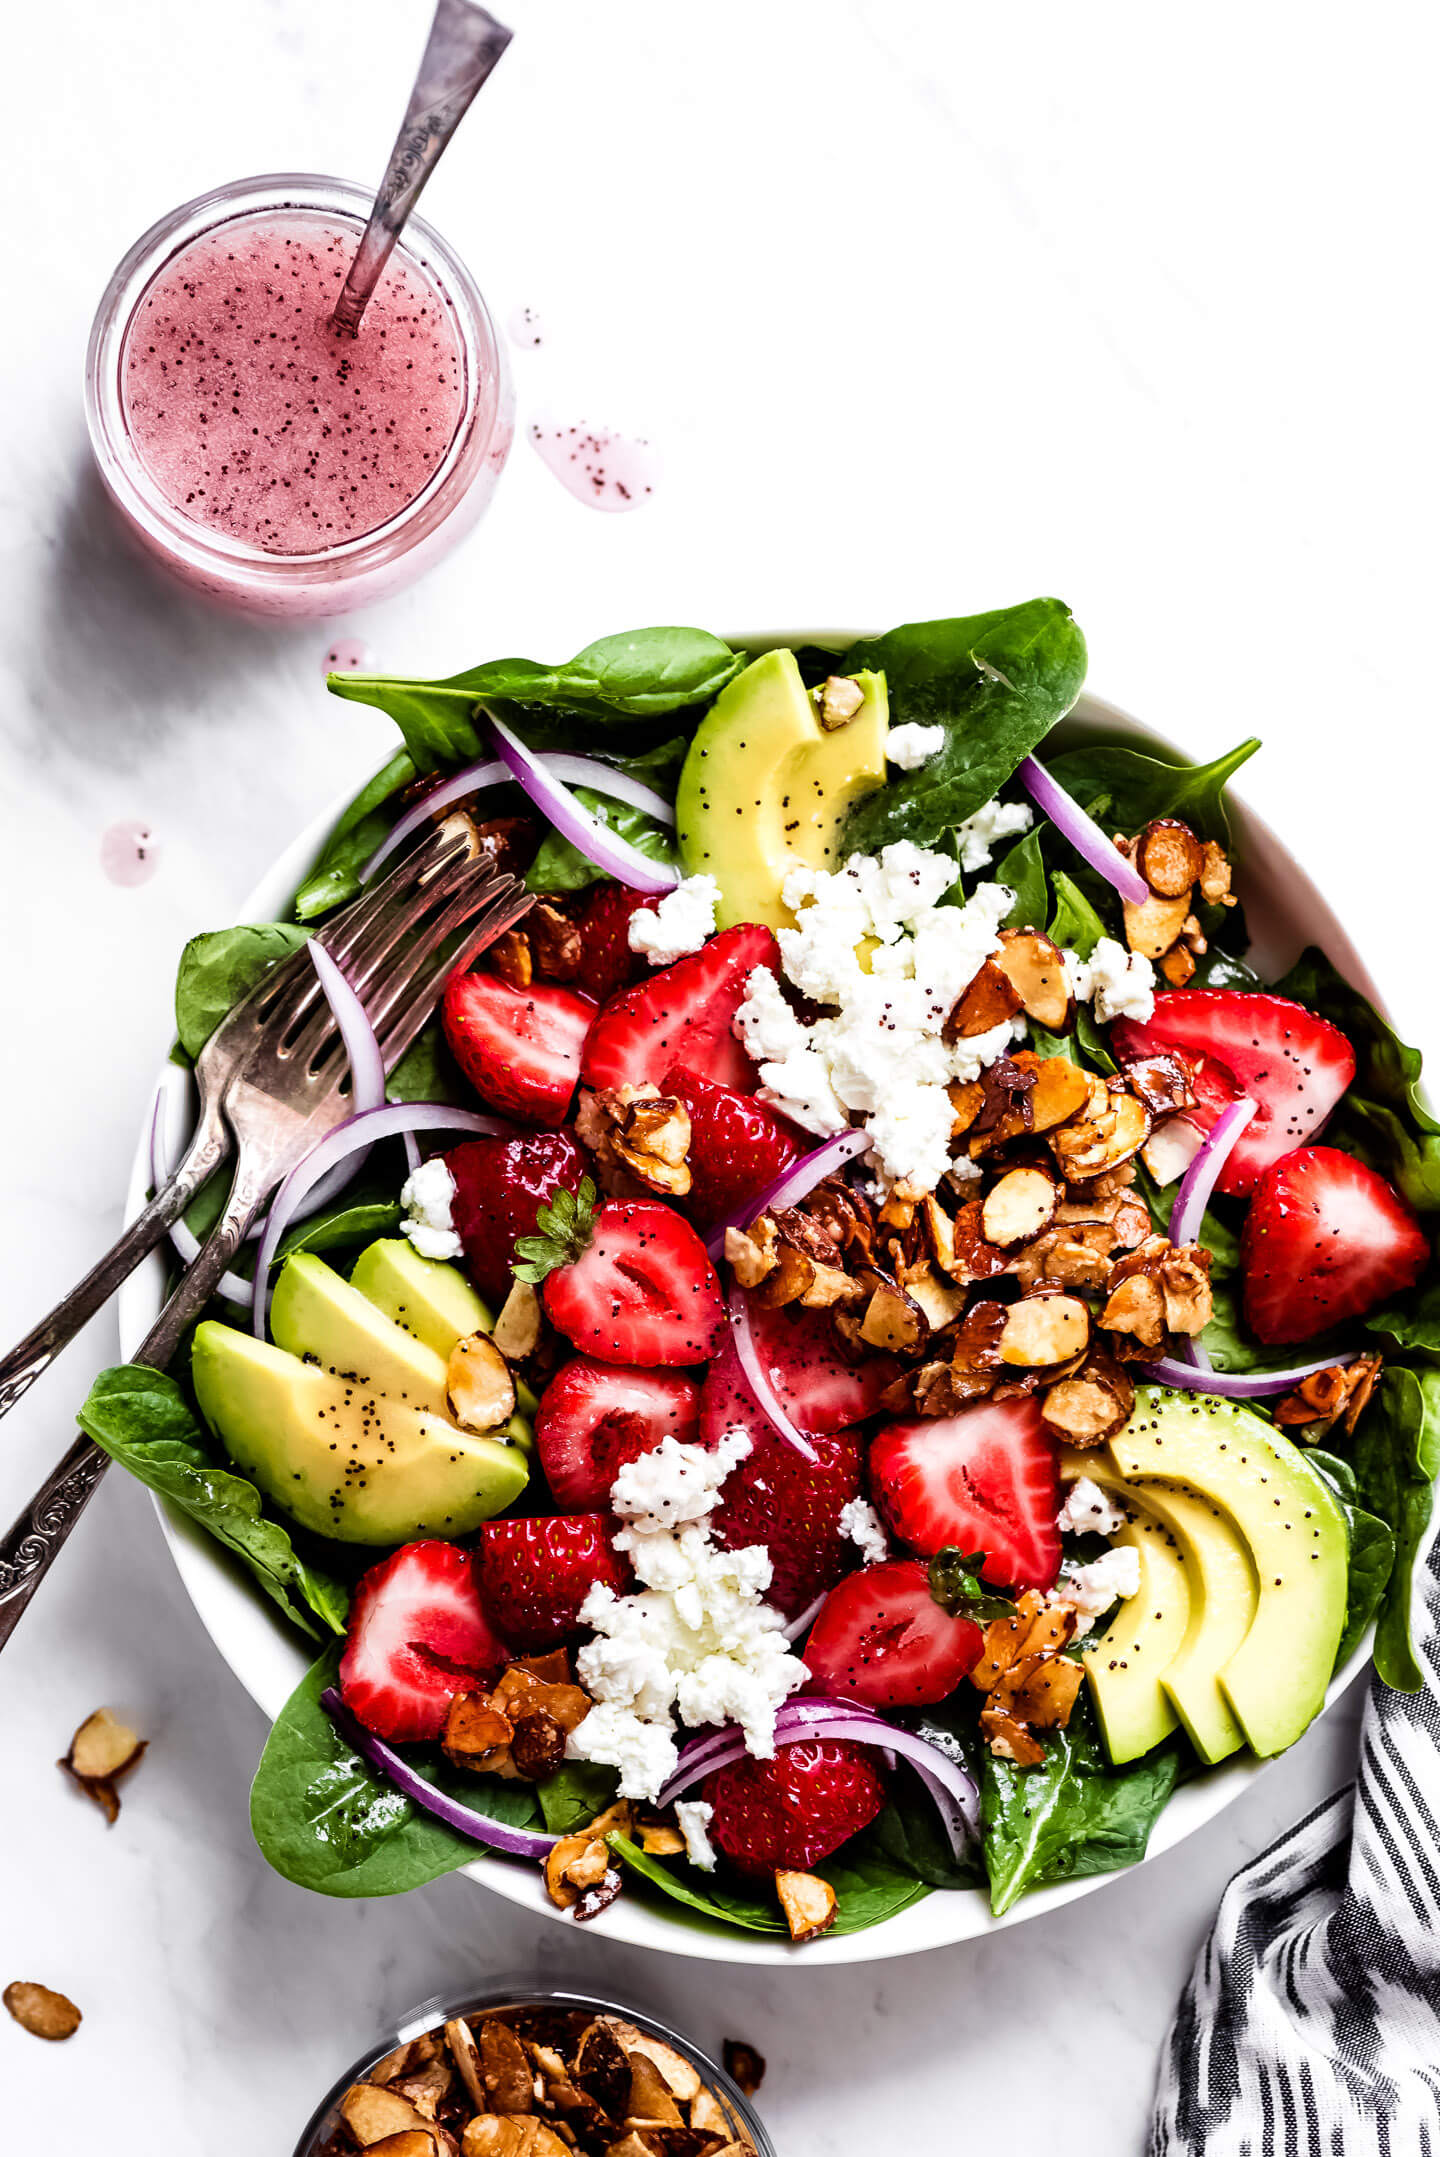 A Strawberry Spinach Salad topped with avocado, caramelized nuts, red onions, and goat cheese with poppy seed dressing on the side.